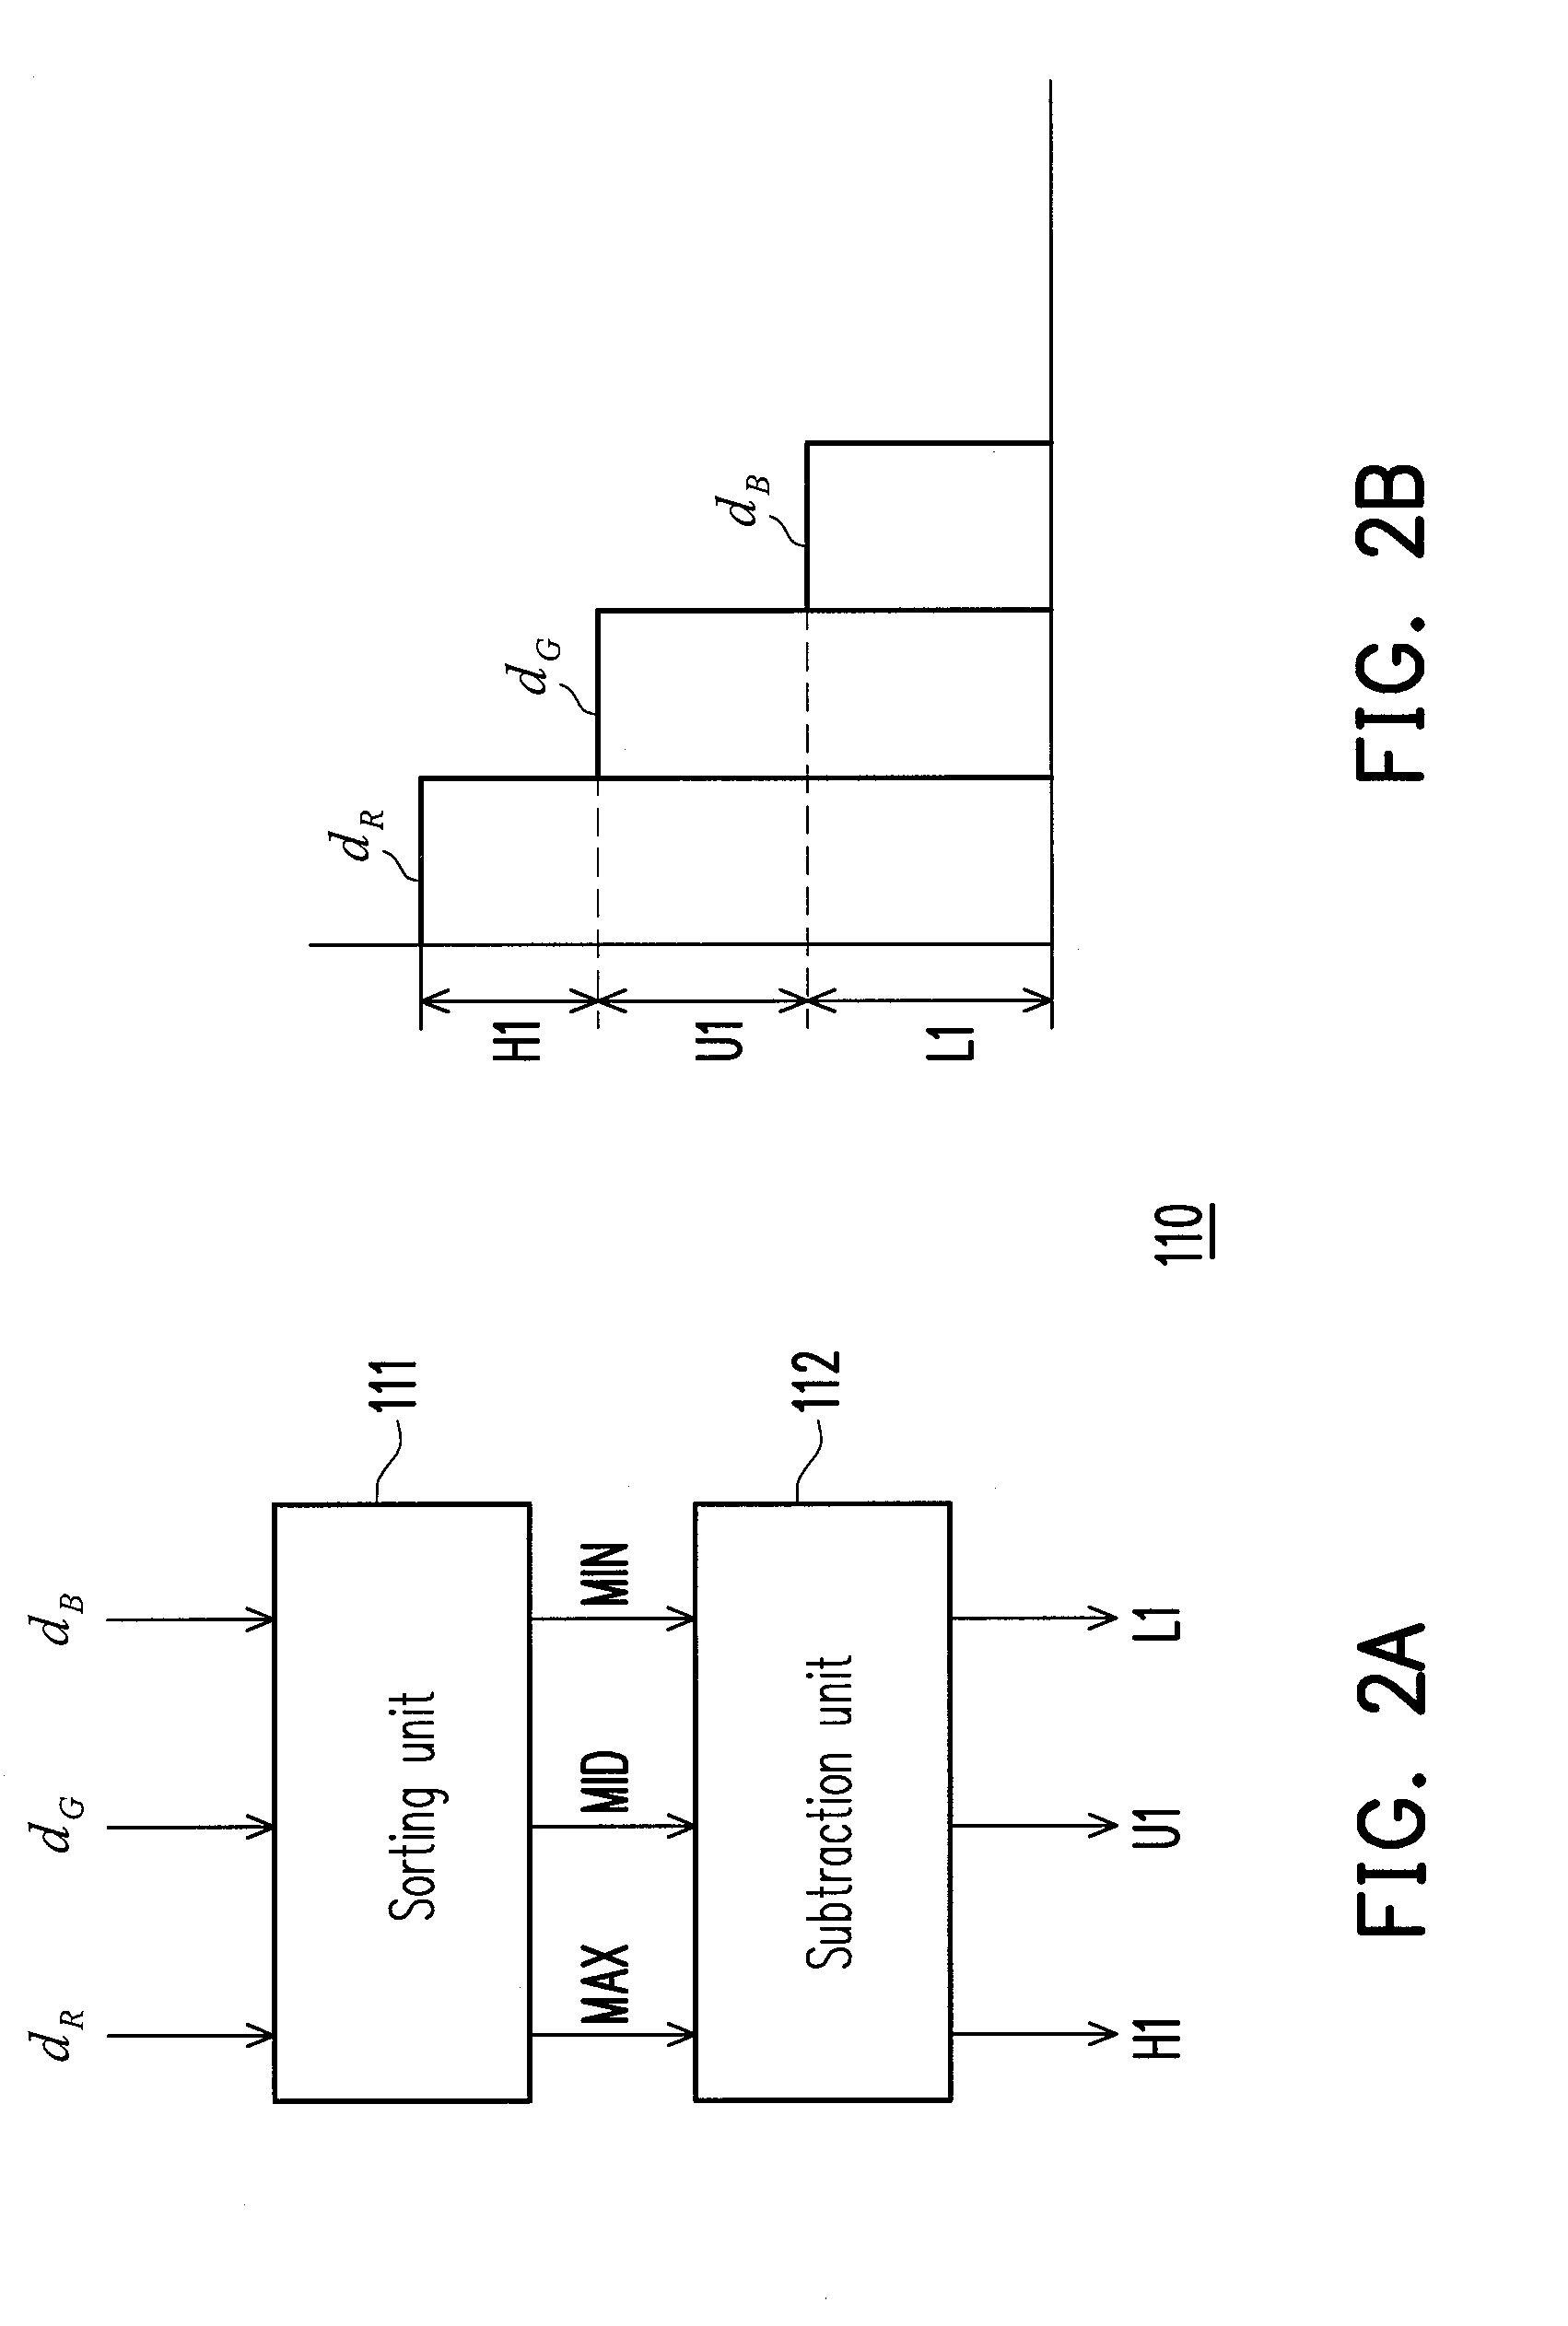 Color calibrator of display device